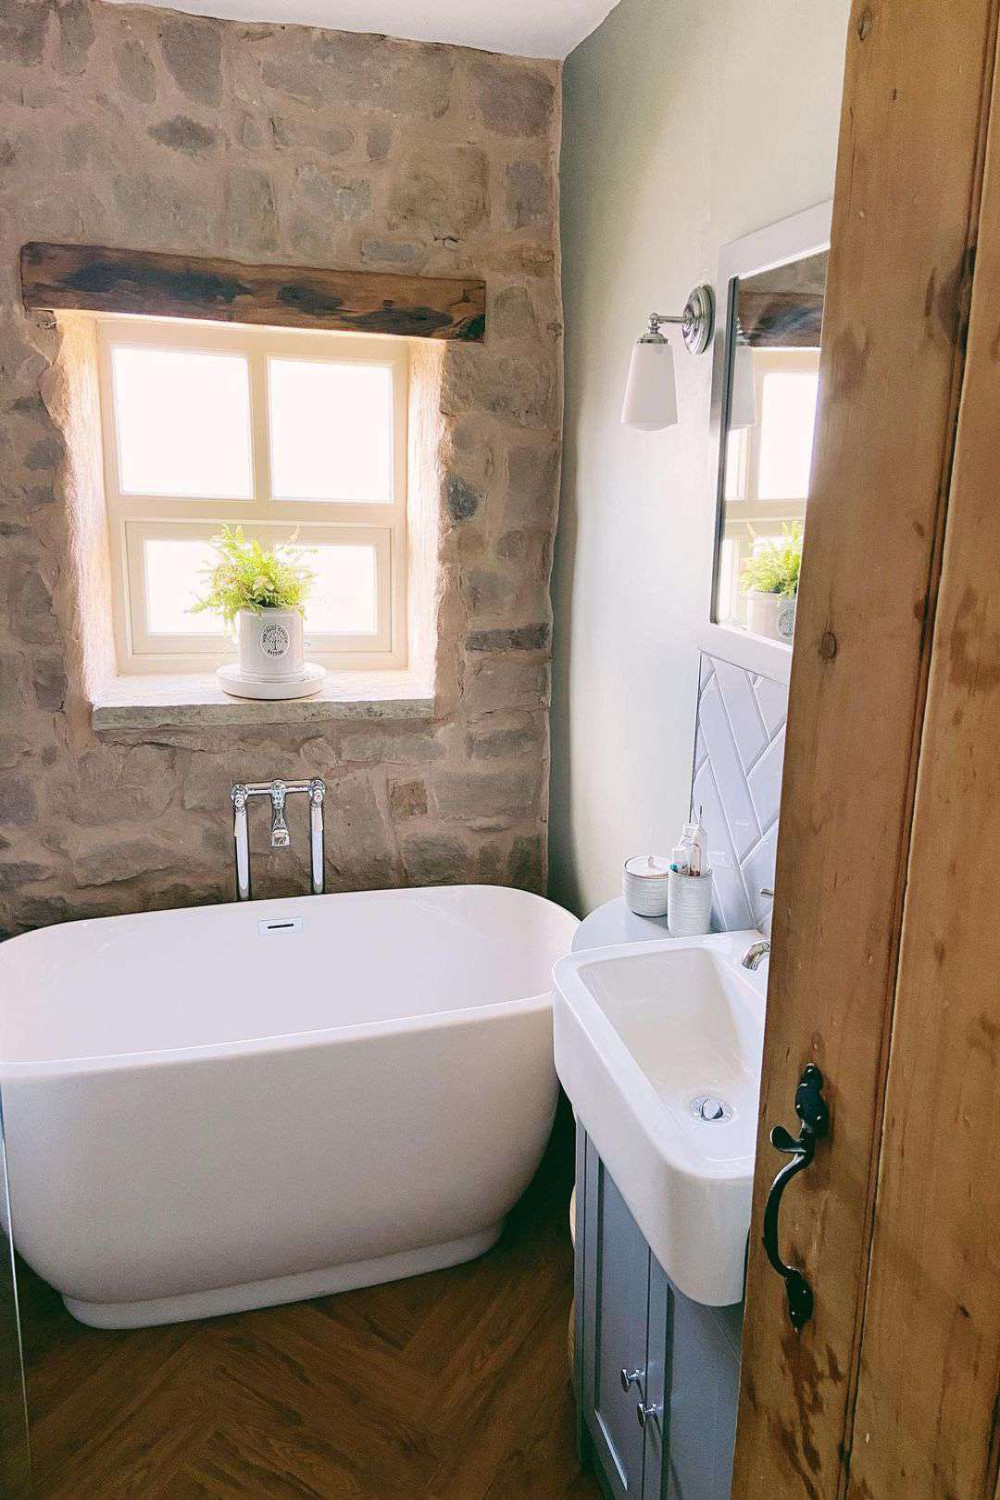 Cabin Bathroom Ideas That Are Rustic-Chic